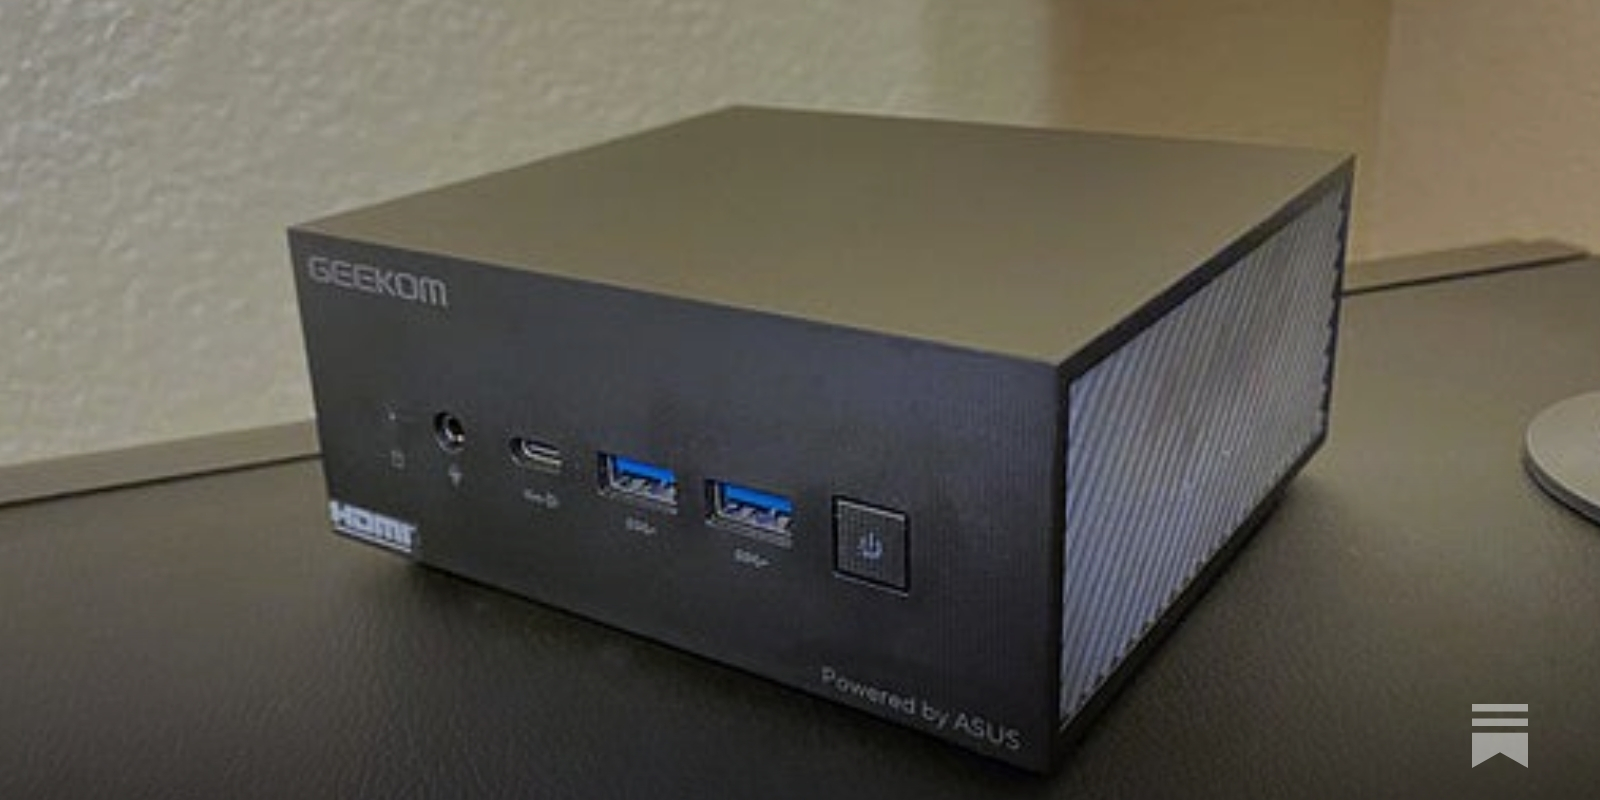 GEEKOM AS 6 Mini PC Quick Review - by Mark LoProto